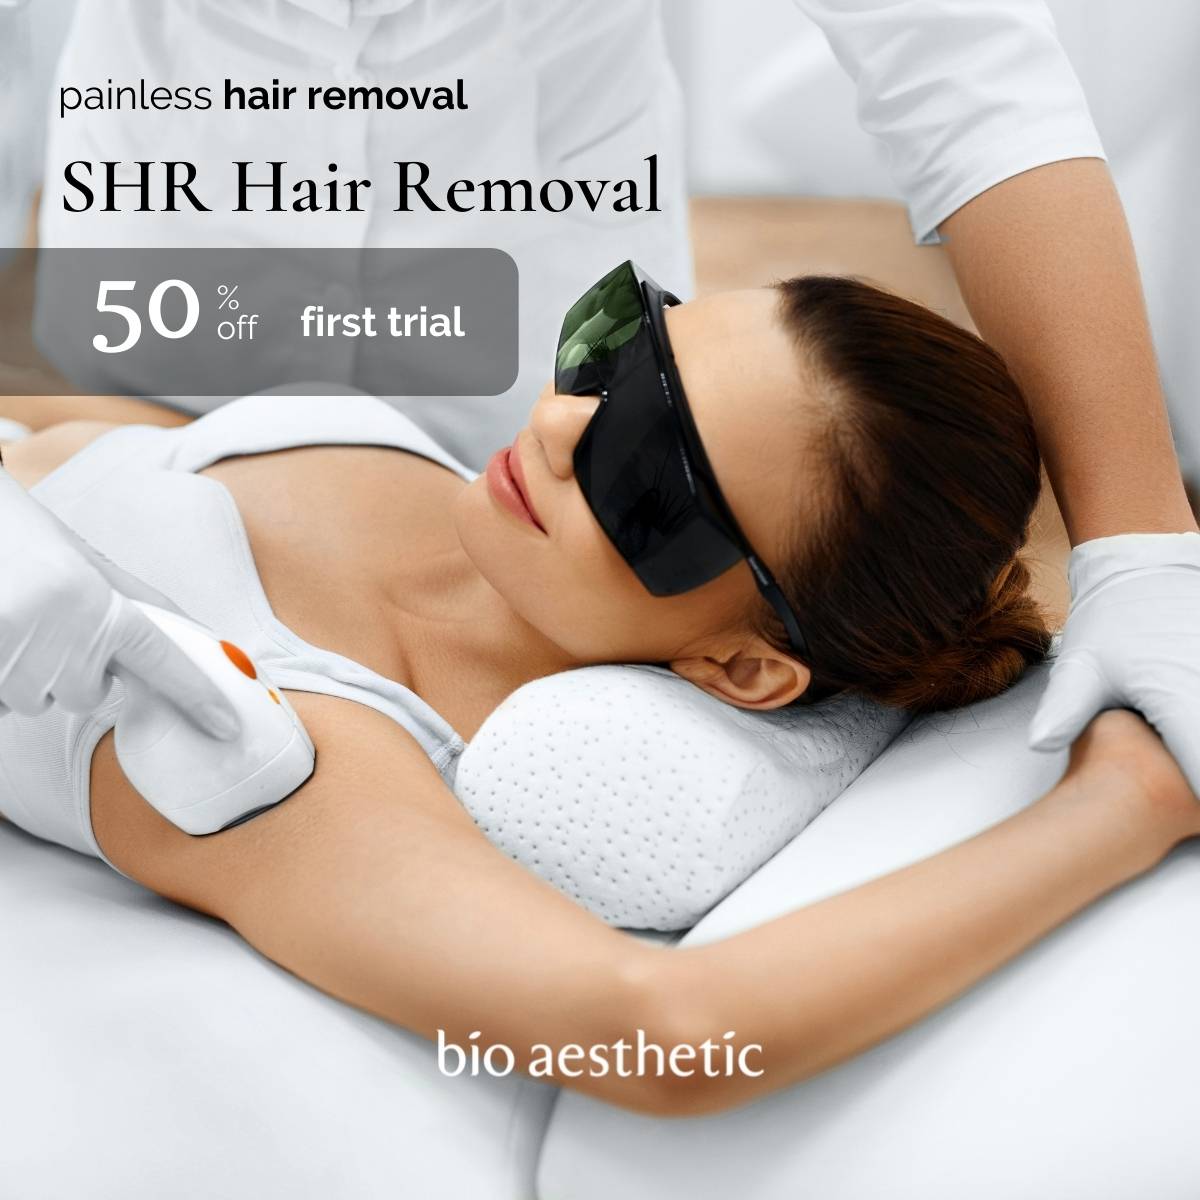 SHR Hair Removal Trial - 50% off for First Trial - From $39 - Bio Aesthetic